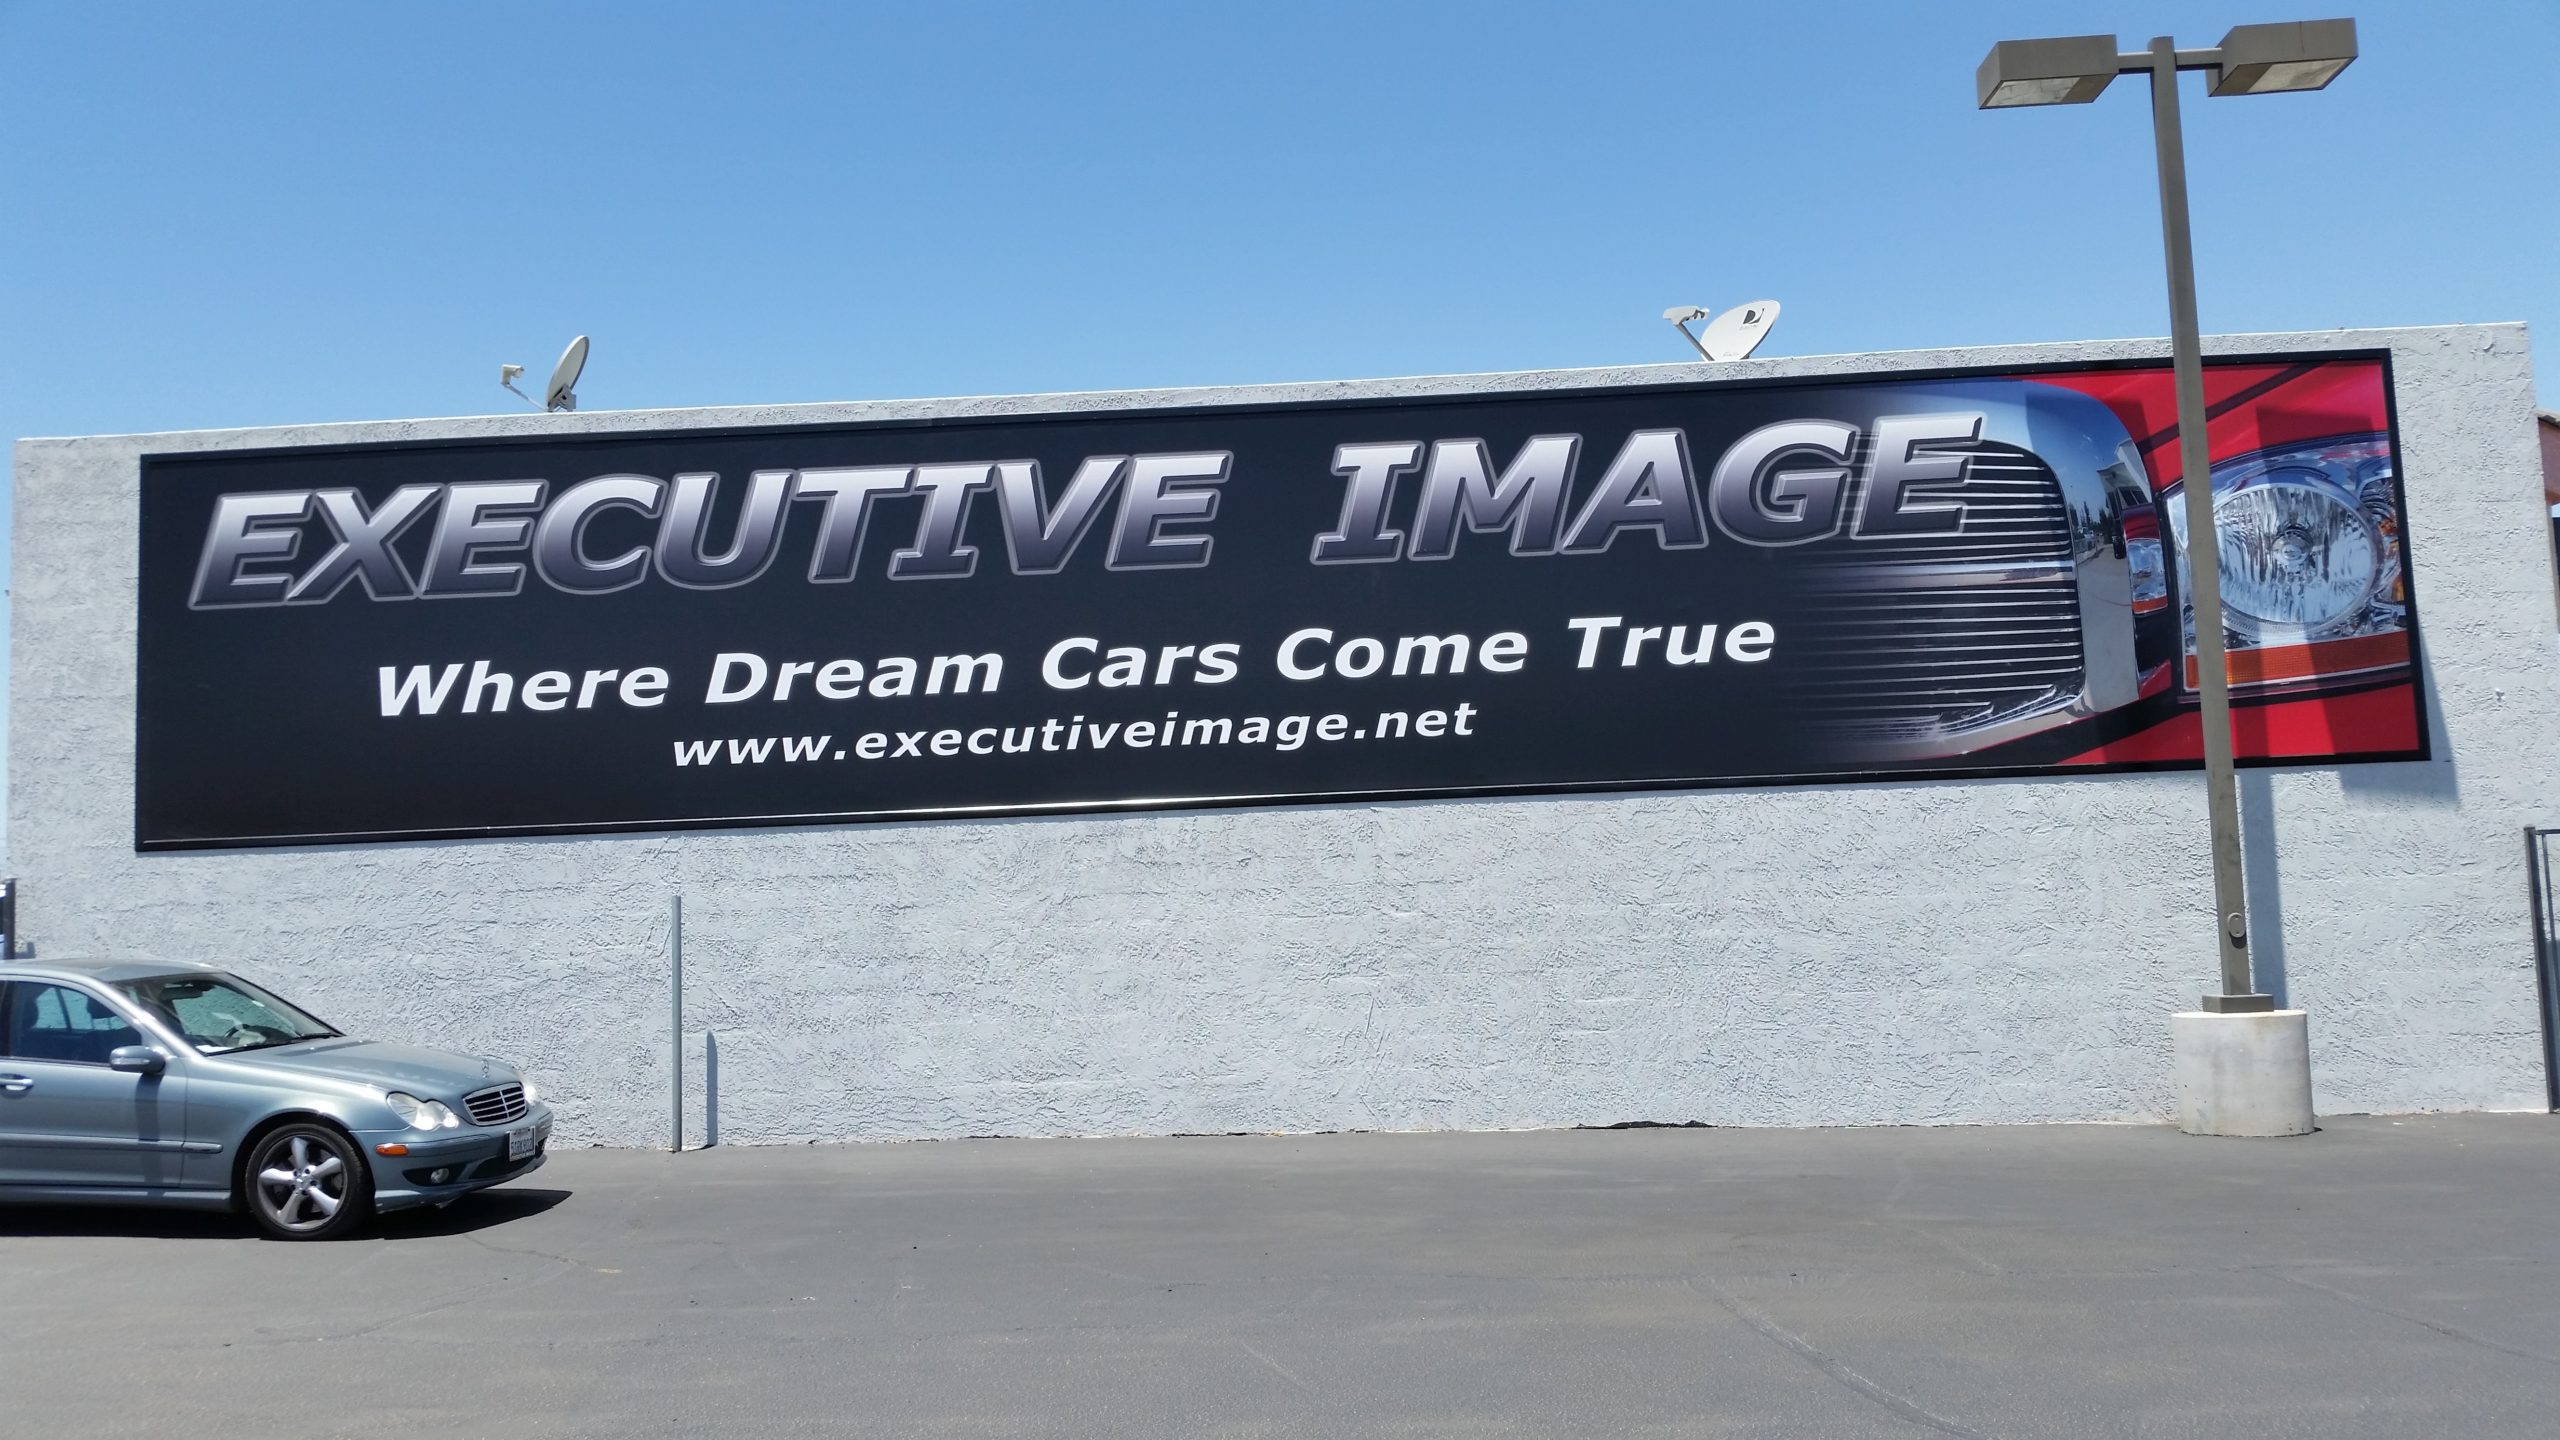 The Car Dealership Opportunity for Sign and Print Shops